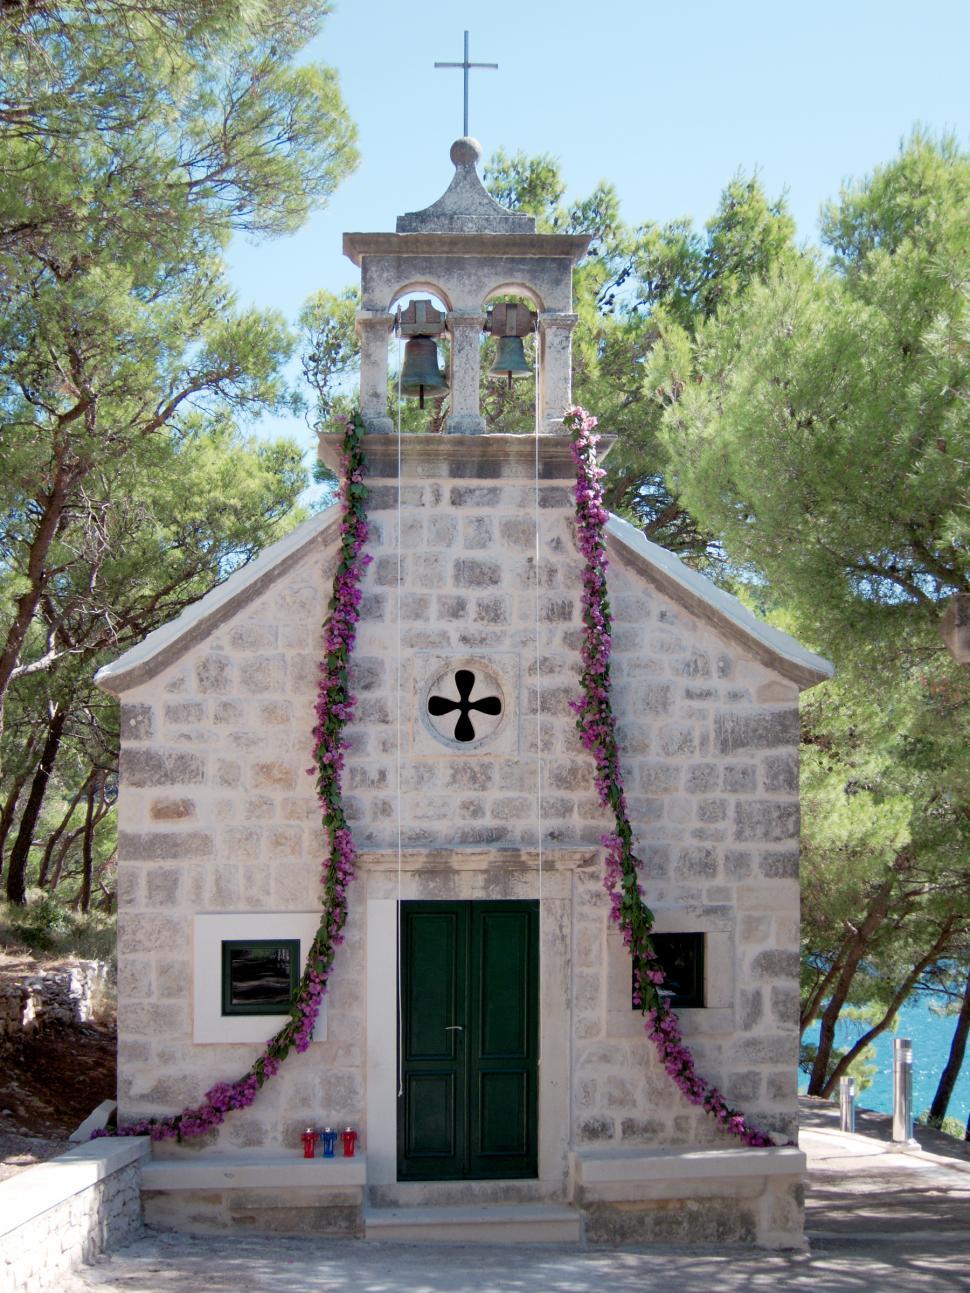 Free Image of Small church 